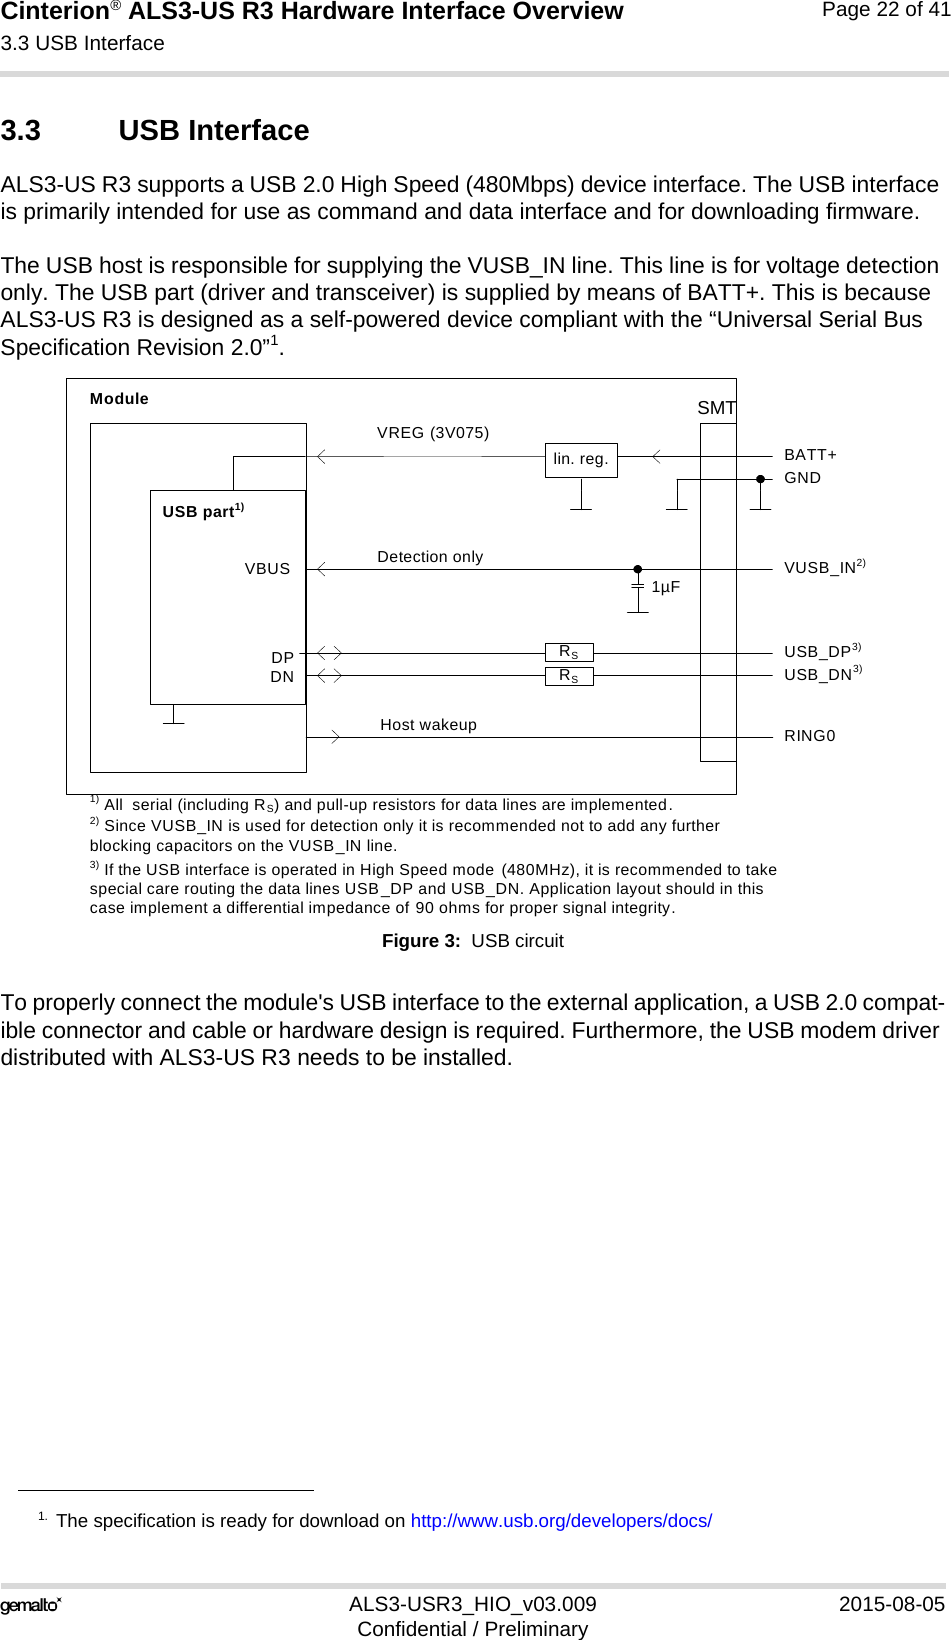 Cinterion® ALS3-US R3 Hardware Interface Overview3.3 USB Interface27ALS3-USR3_HIO_v03.009 2015-08-05Confidential / PreliminaryPage 22 of 413.3 USB InterfaceALS3-US R3 supports a USB 2.0 High Speed (480Mbps) device interface. The USB interface is primarily intended for use as command and data interface and for downloading firmware. The USB host is responsible for supplying the VUSB_IN line. This line is for voltage detection only. The USB part (driver and transceiver) is supplied by means of BATT+. This is because ALS3-US R3 is designed as a self-powered device compliant with the “Universal Serial Bus Specification Revision 2.0”1.Figure 3:  USB circuitTo properly connect the module&apos;s USB interface to the external application, a USB 2.0 compat-ible connector and cable or hardware design is required. Furthermore, the USB modem driver distributed with ALS3-US R3 needs to be installed.1. The specification is ready for download on http://www.usb.org/developers/docs/DPDNVREG (3V075)BATT+USB_DP3)lin. reg. GNDModuleDetection only VUSB_IN2)USB part1)1) All  serial (including RS) and pull-up resistors for data lines are implemented.USB_DN3)3) If the USB interface is operated in High Speed mode  (480MHz), it is recommended to take special care routing the data lines USB_DP and USB_DN. Application layout should in this case implement a differential impedance of 90 ohms for proper signal integrity.RSRSVBUS 1µF2) Since VUSB_IN is used for detection only it is recommended not to add any further blocking capacitors on the VUSB_IN line.Host wakeup RING0SMT